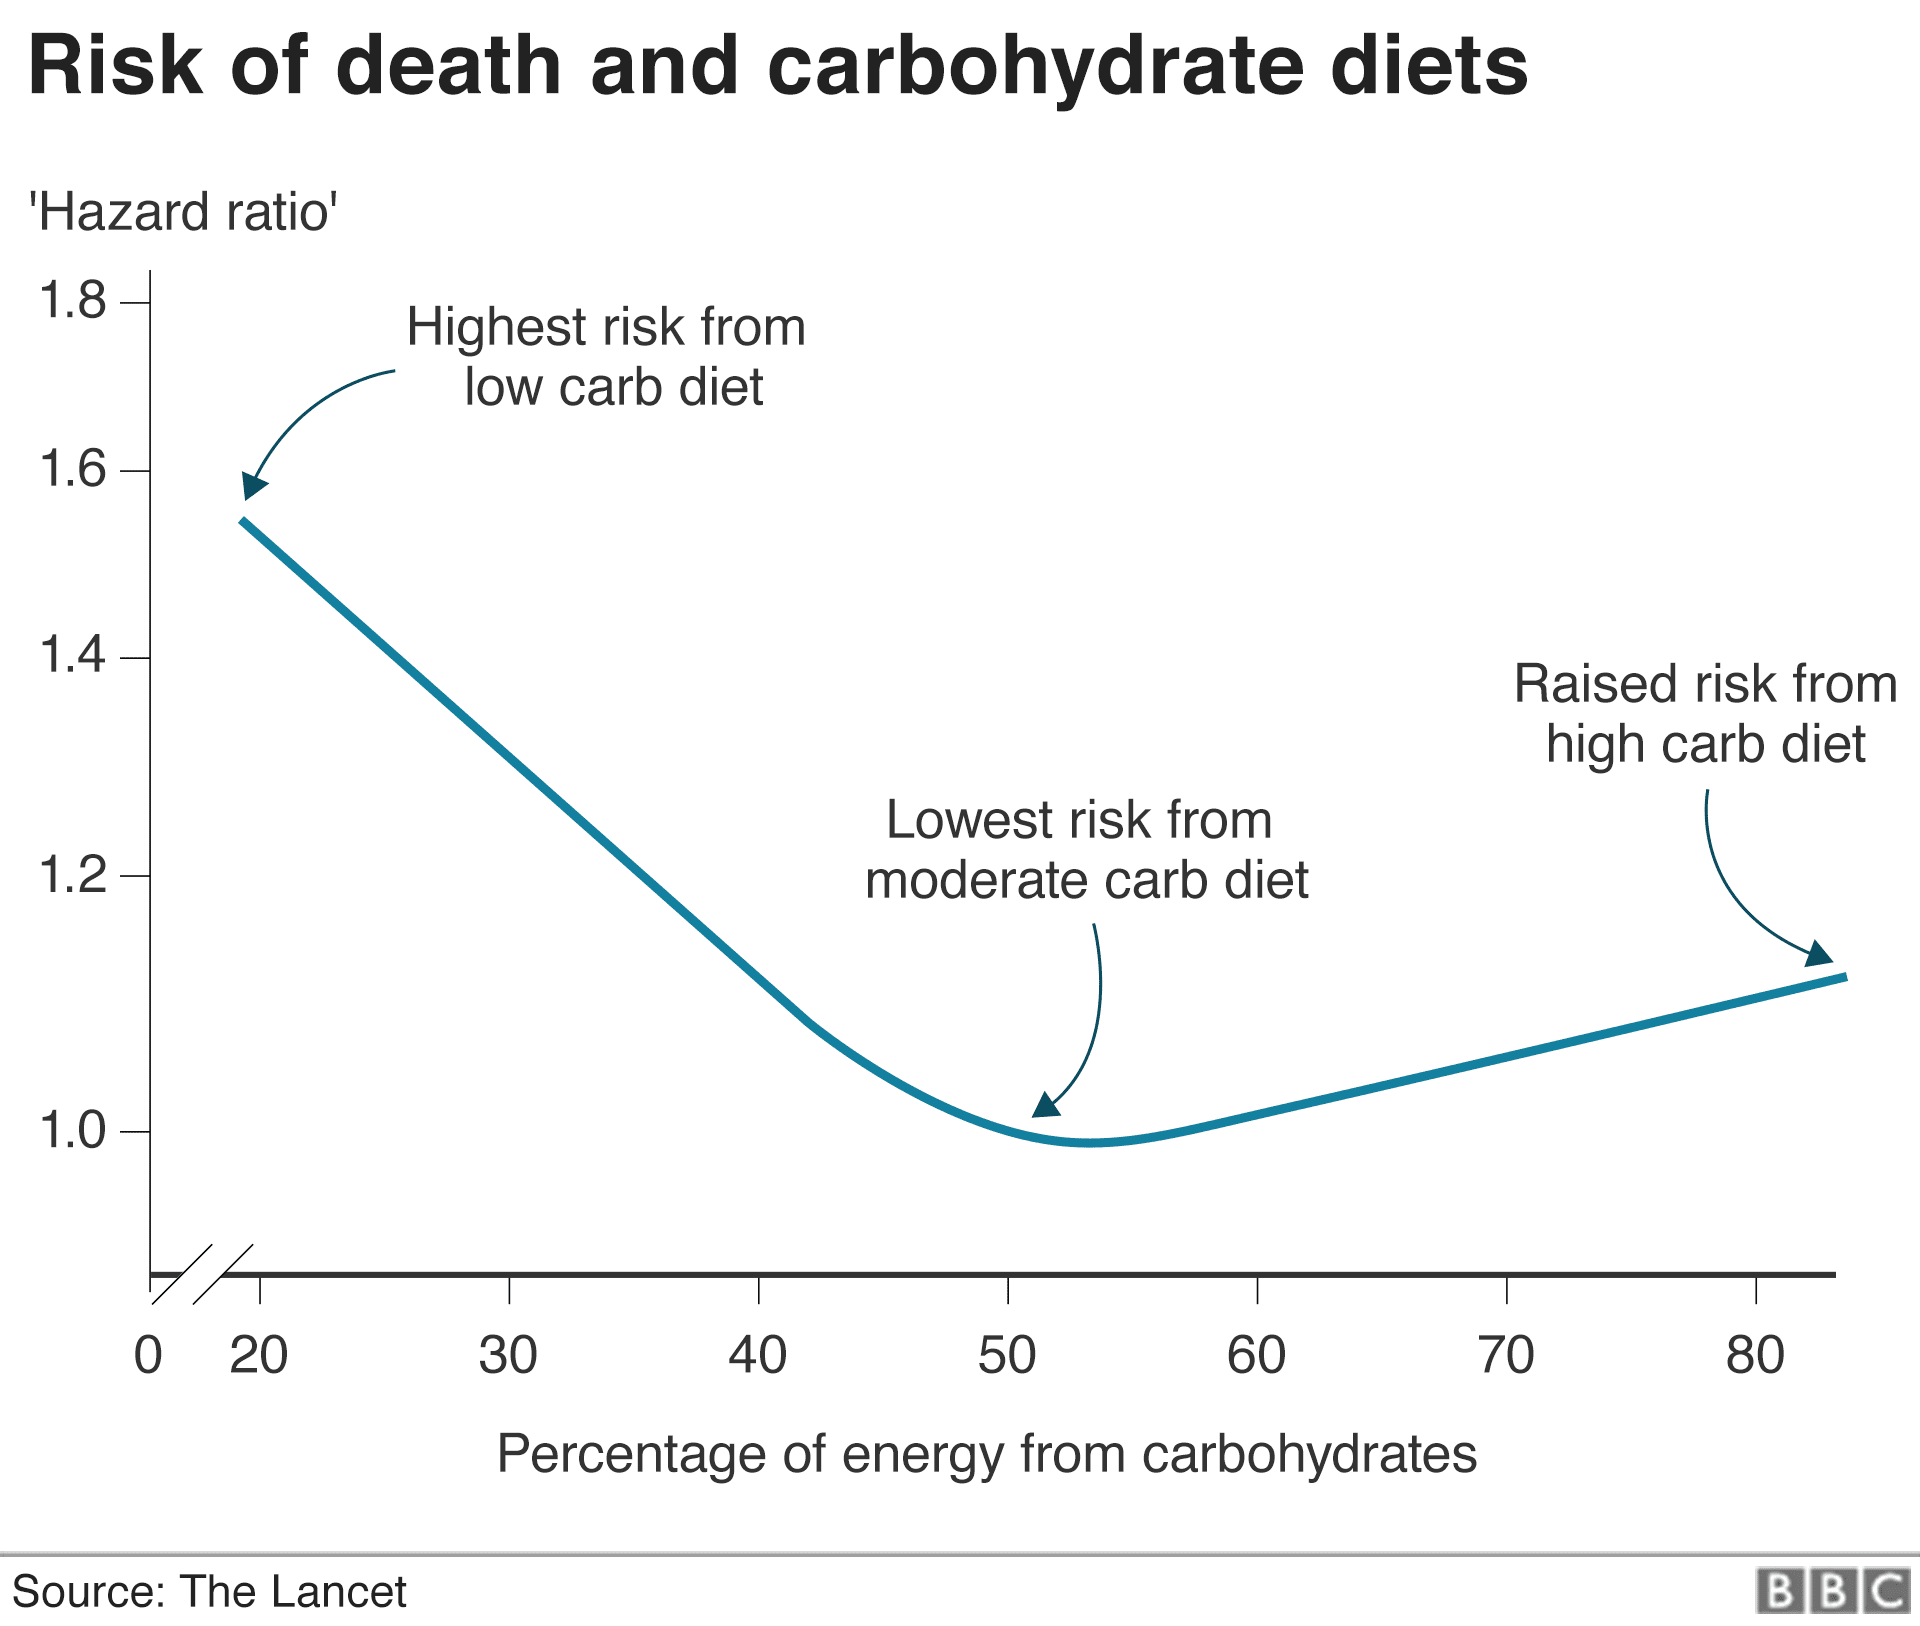 Graph showing risk of death and carbohydrate diets